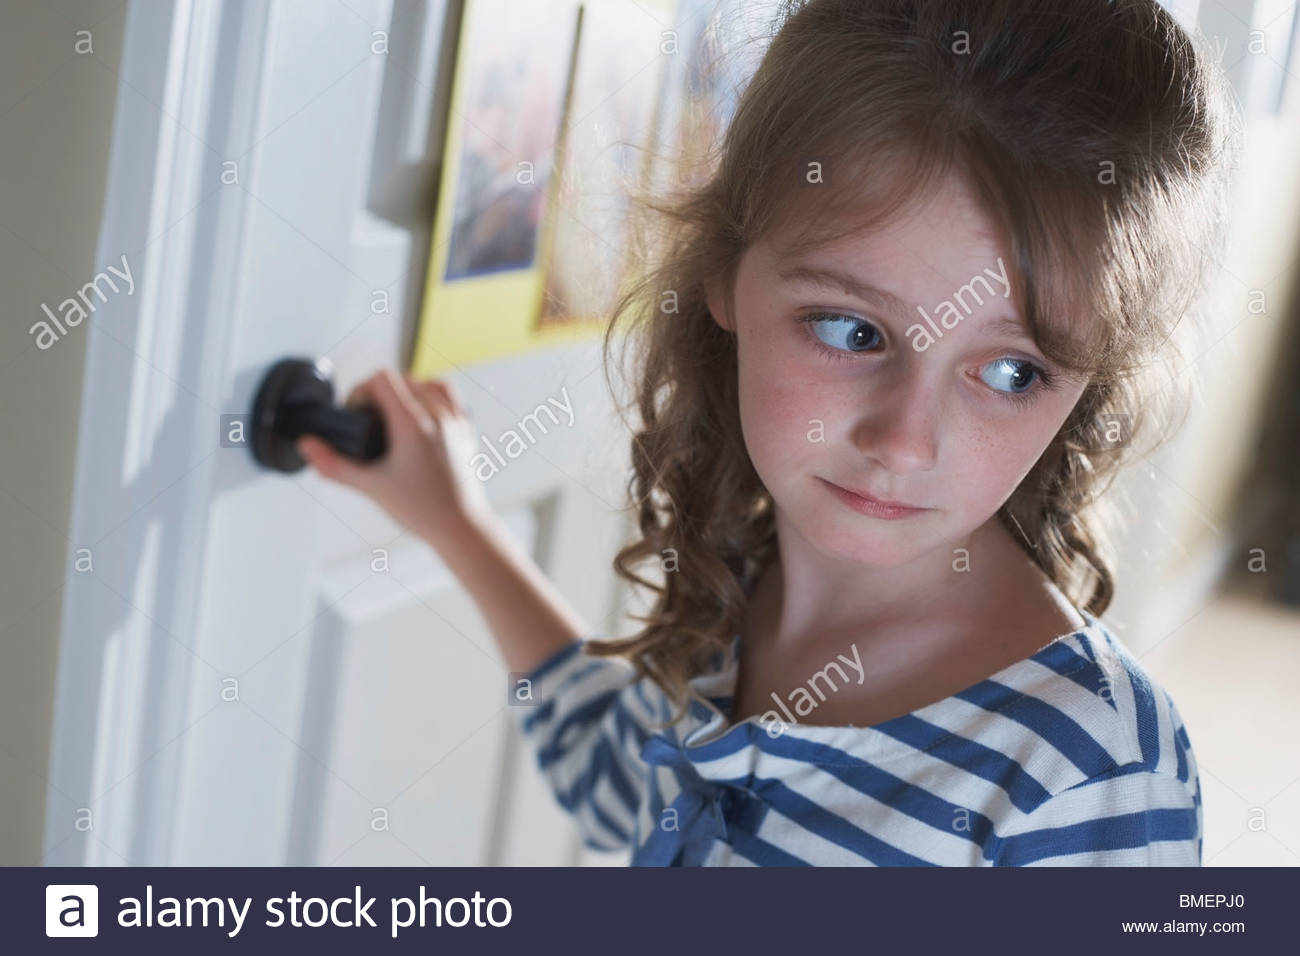 A Girl Turning A Doorknob To Leave Stock Photo 29828568 Alamy pertaining to sizing 1300 X 956